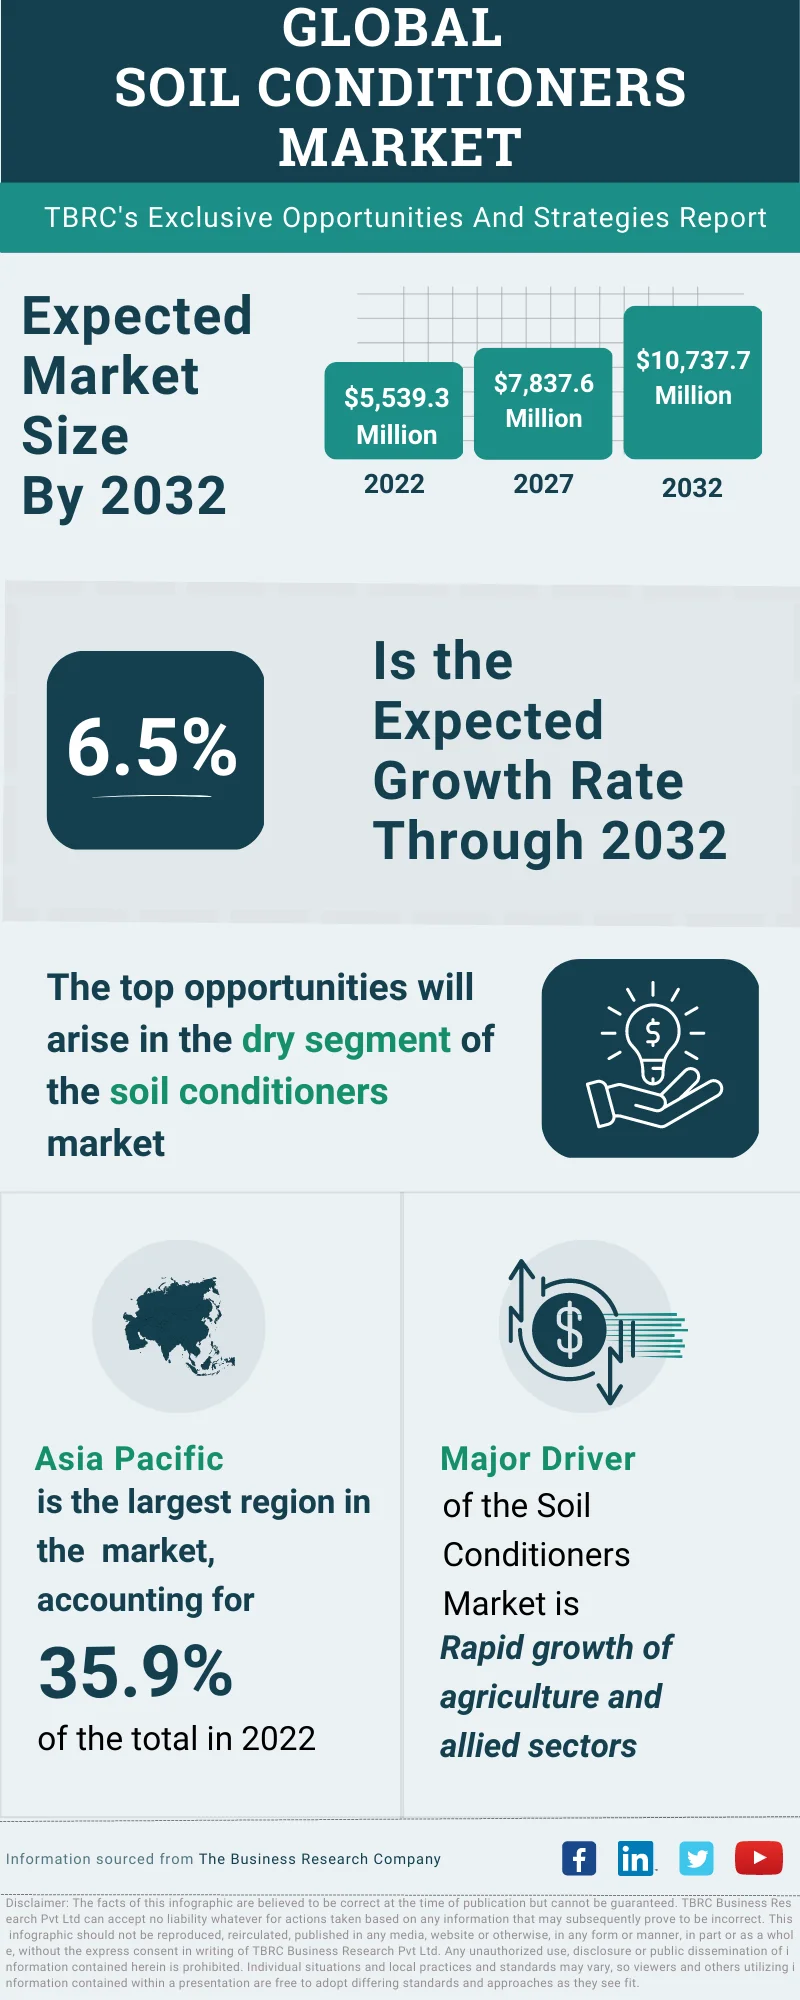 Soil Conditioners Global Market Opportunities And Strategies To 2032